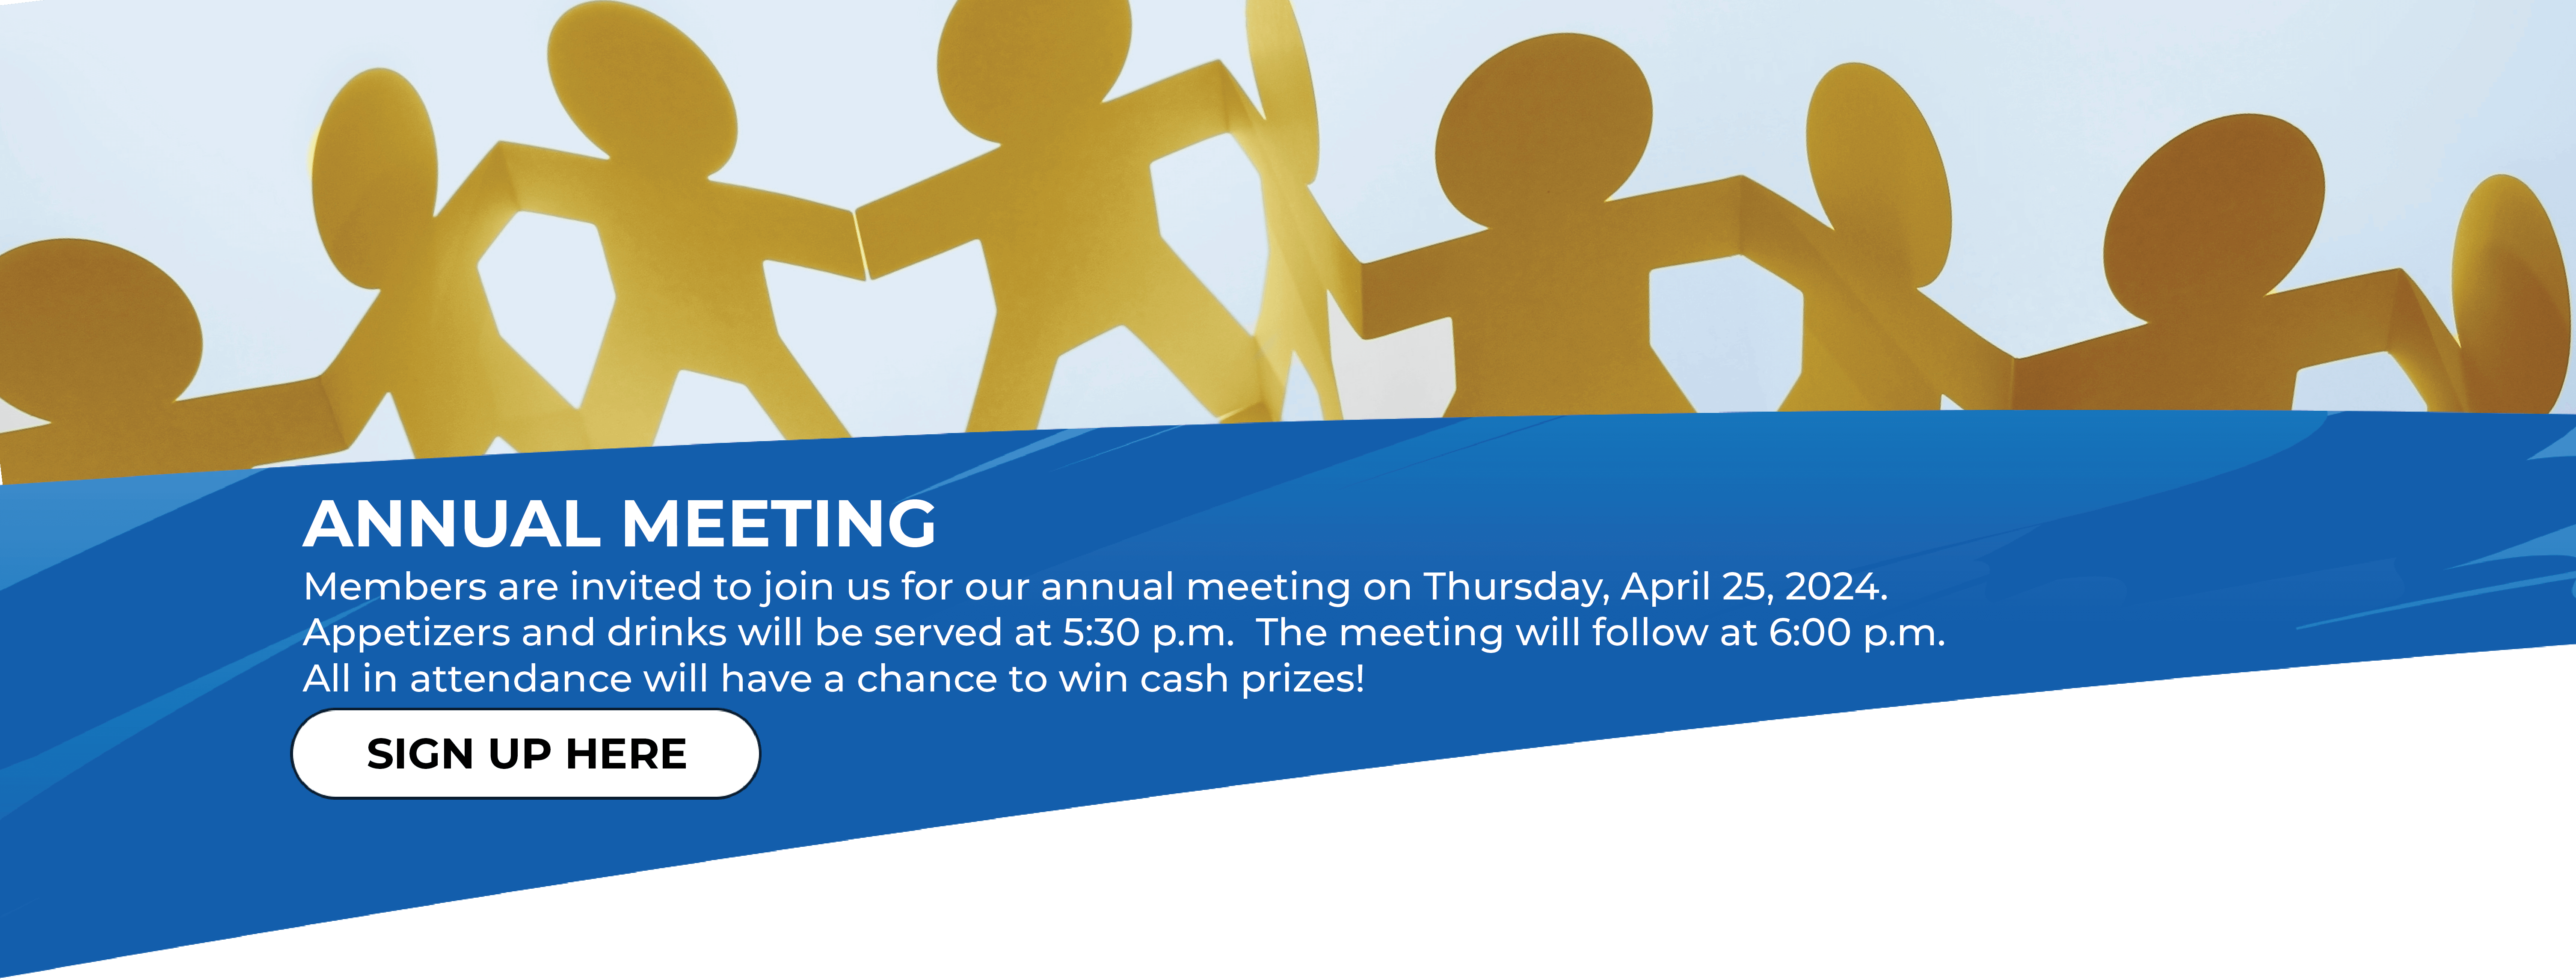 Please join us for our Annual Meeting Thursday, April 25 at 6:00 pm